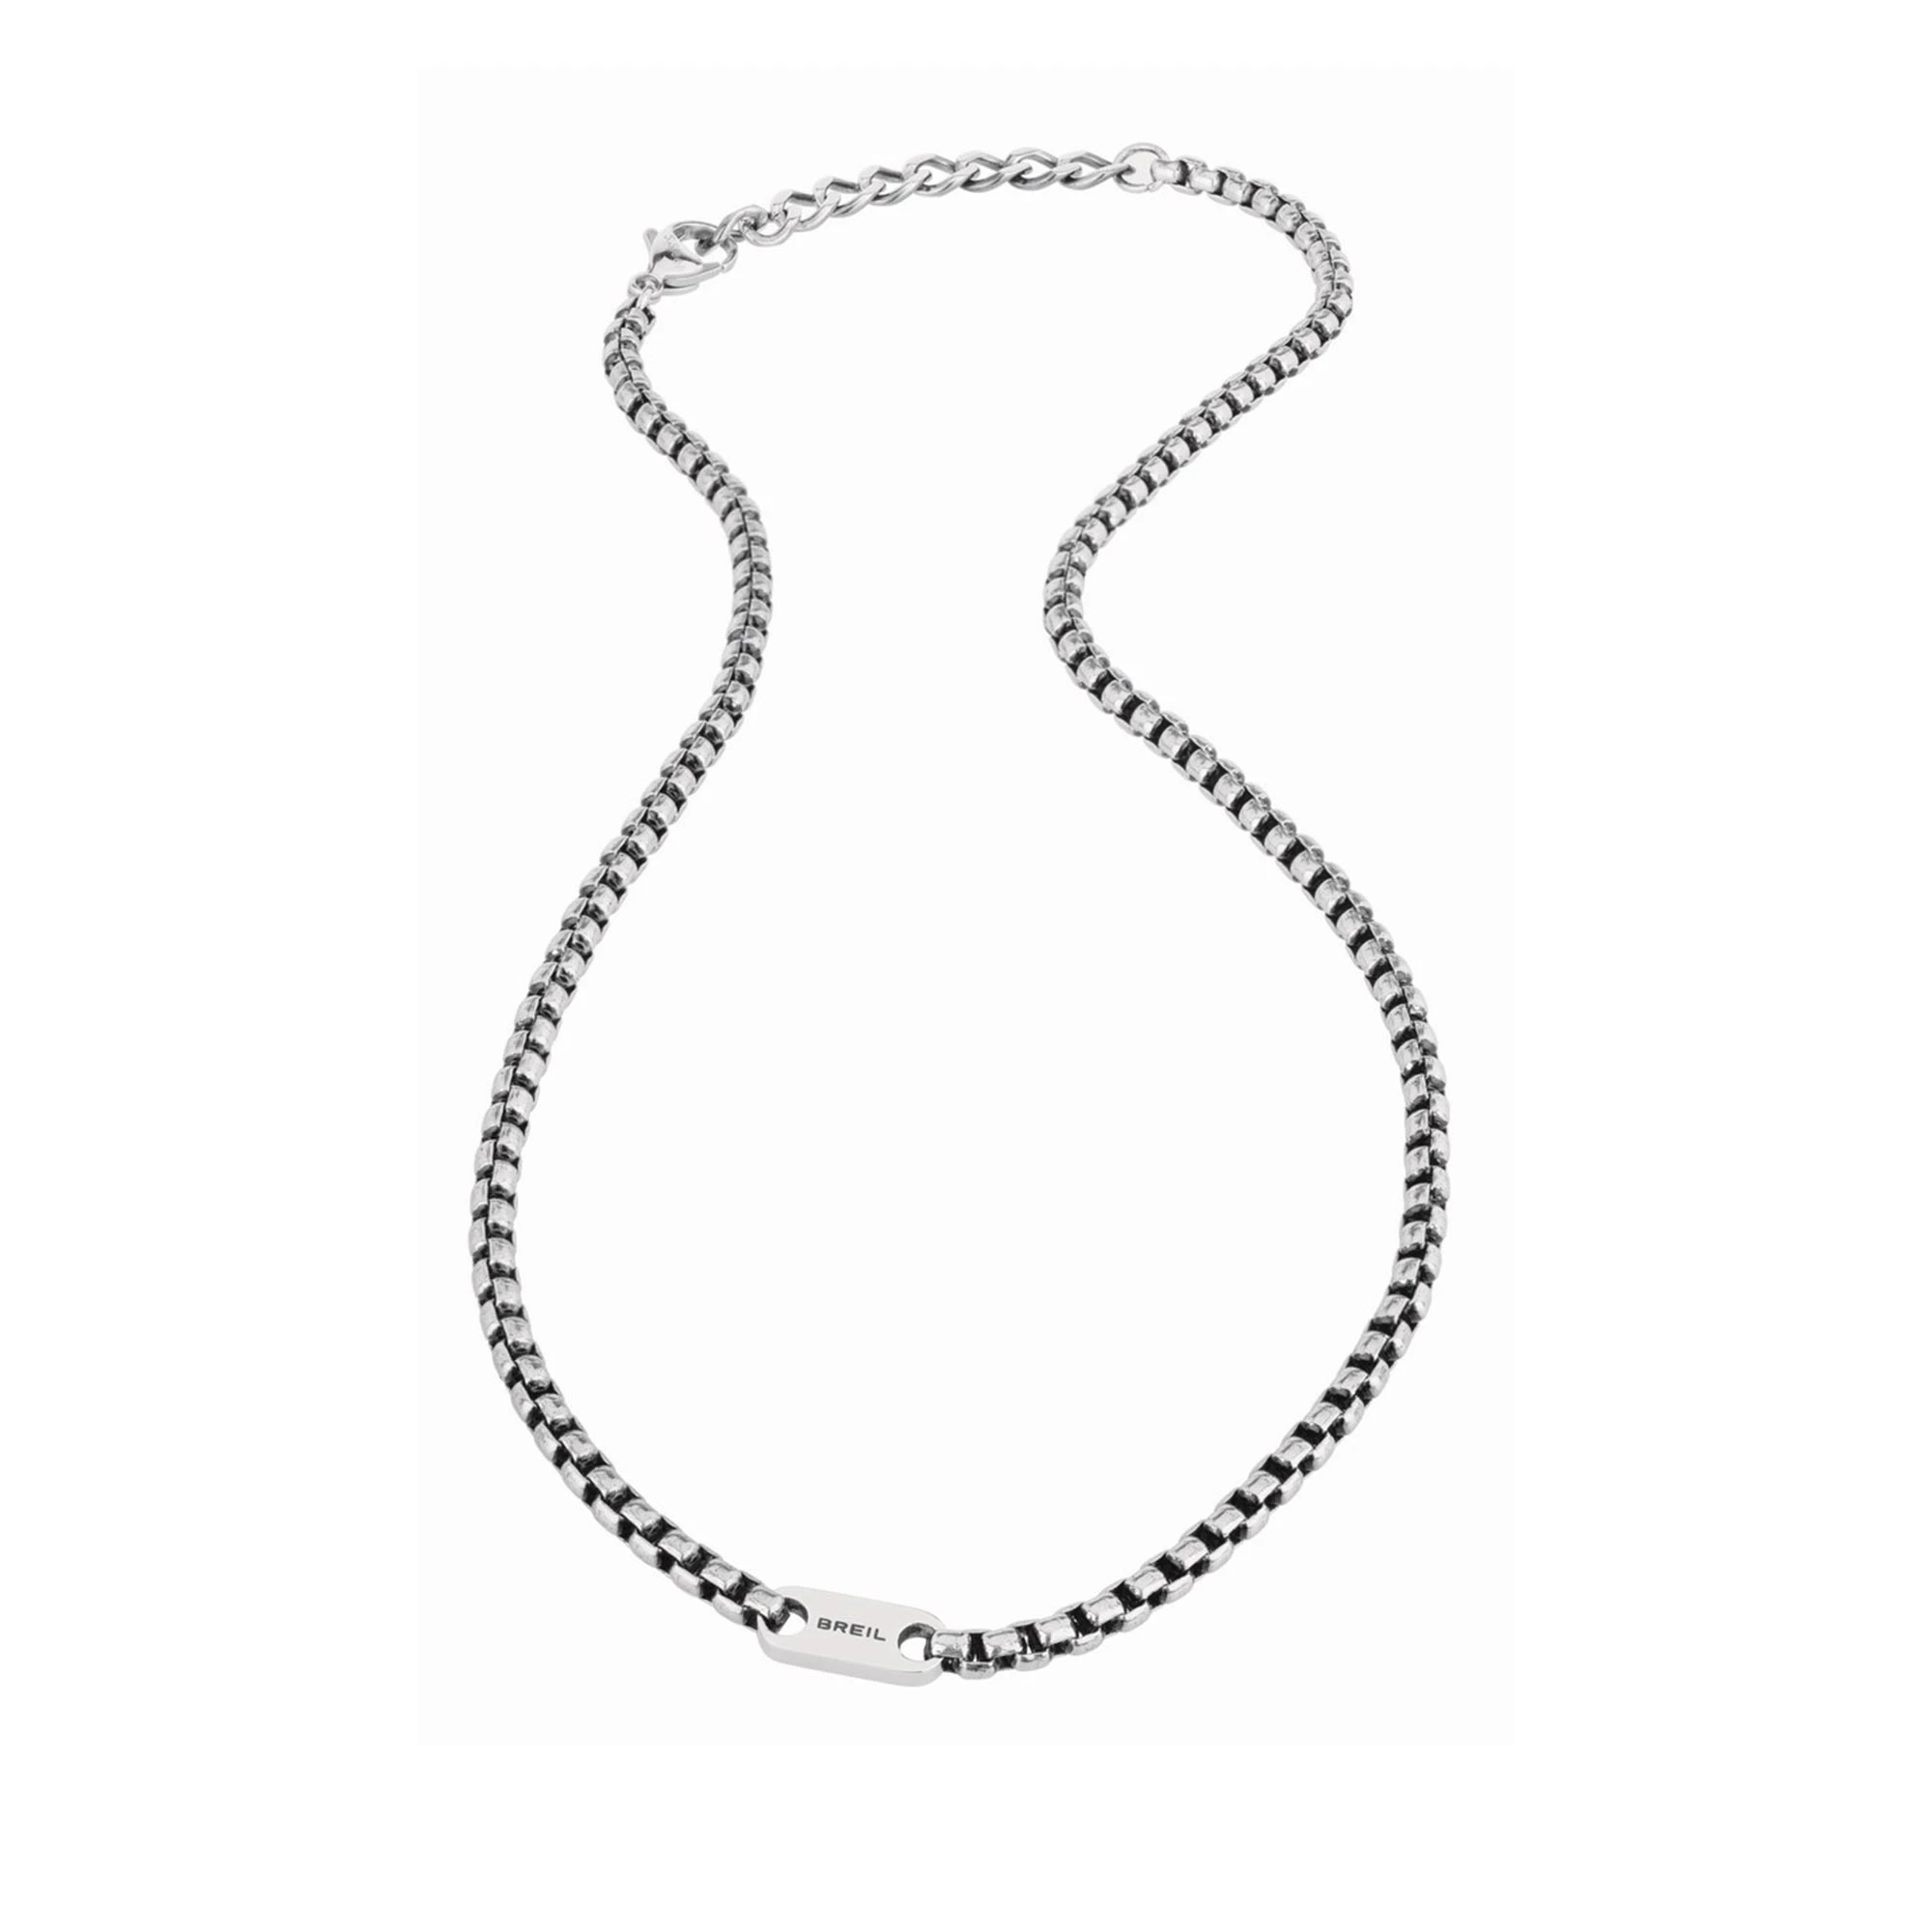 BLACKEN - STAINLESS STEEL NECKLACE WITH ANTIQUE FINISHING - 1 - TJ1946 | Breil